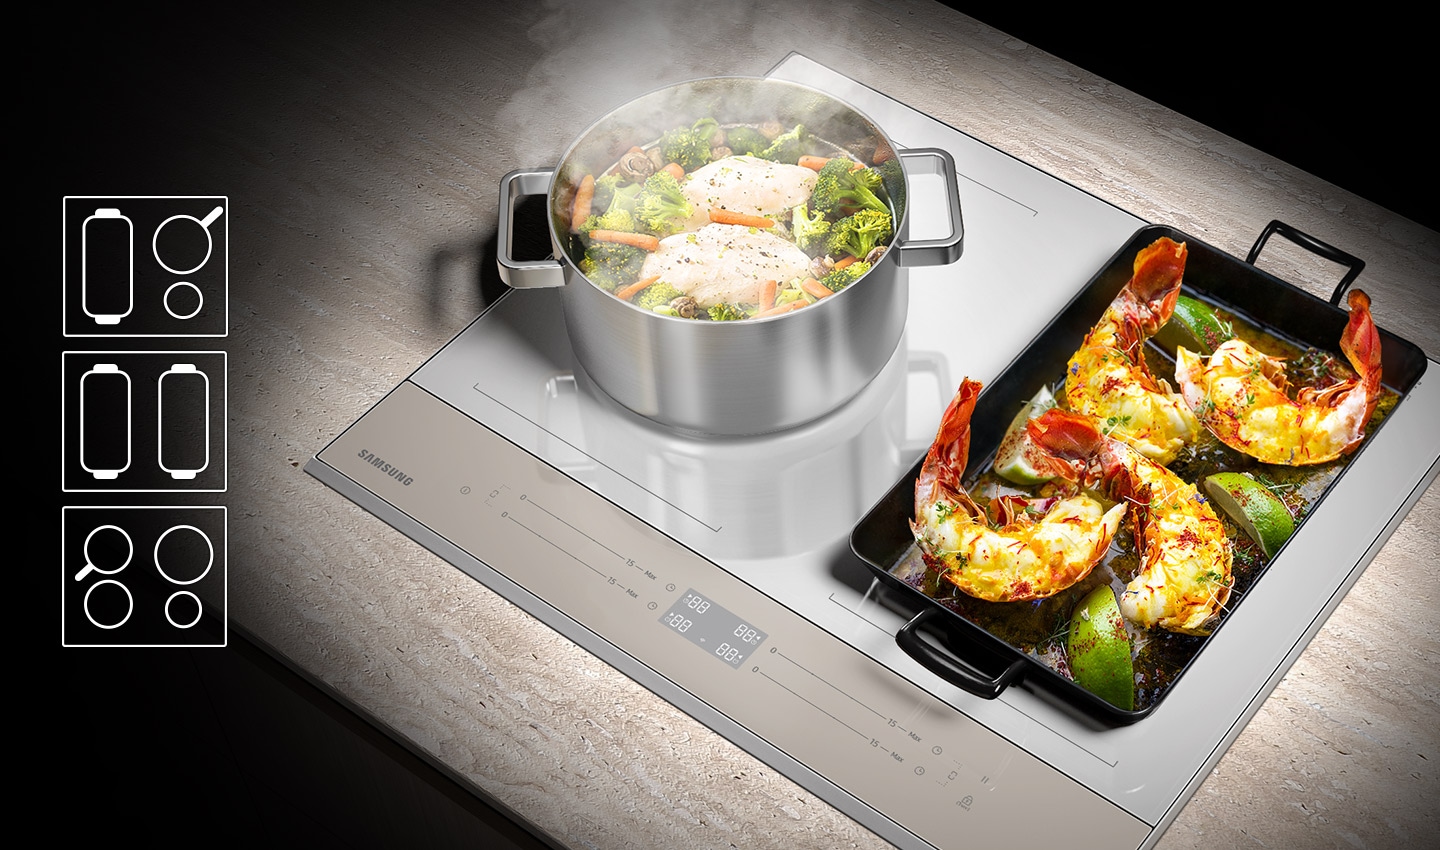 A round stockpot with a boiling chicken breast and vegetables is on the left Flex Zone, and the large square grill pan with lobster grilling is on the right Flex Zone. Icon shows the Dual Flex Zone can be used in three ways. First is one large rectangle-shaped cookware, one medium sized cookware and small sized cookware. Second is two large rectangle-shaped cookware. Third two medium sized cook ware and two small sized cookware.